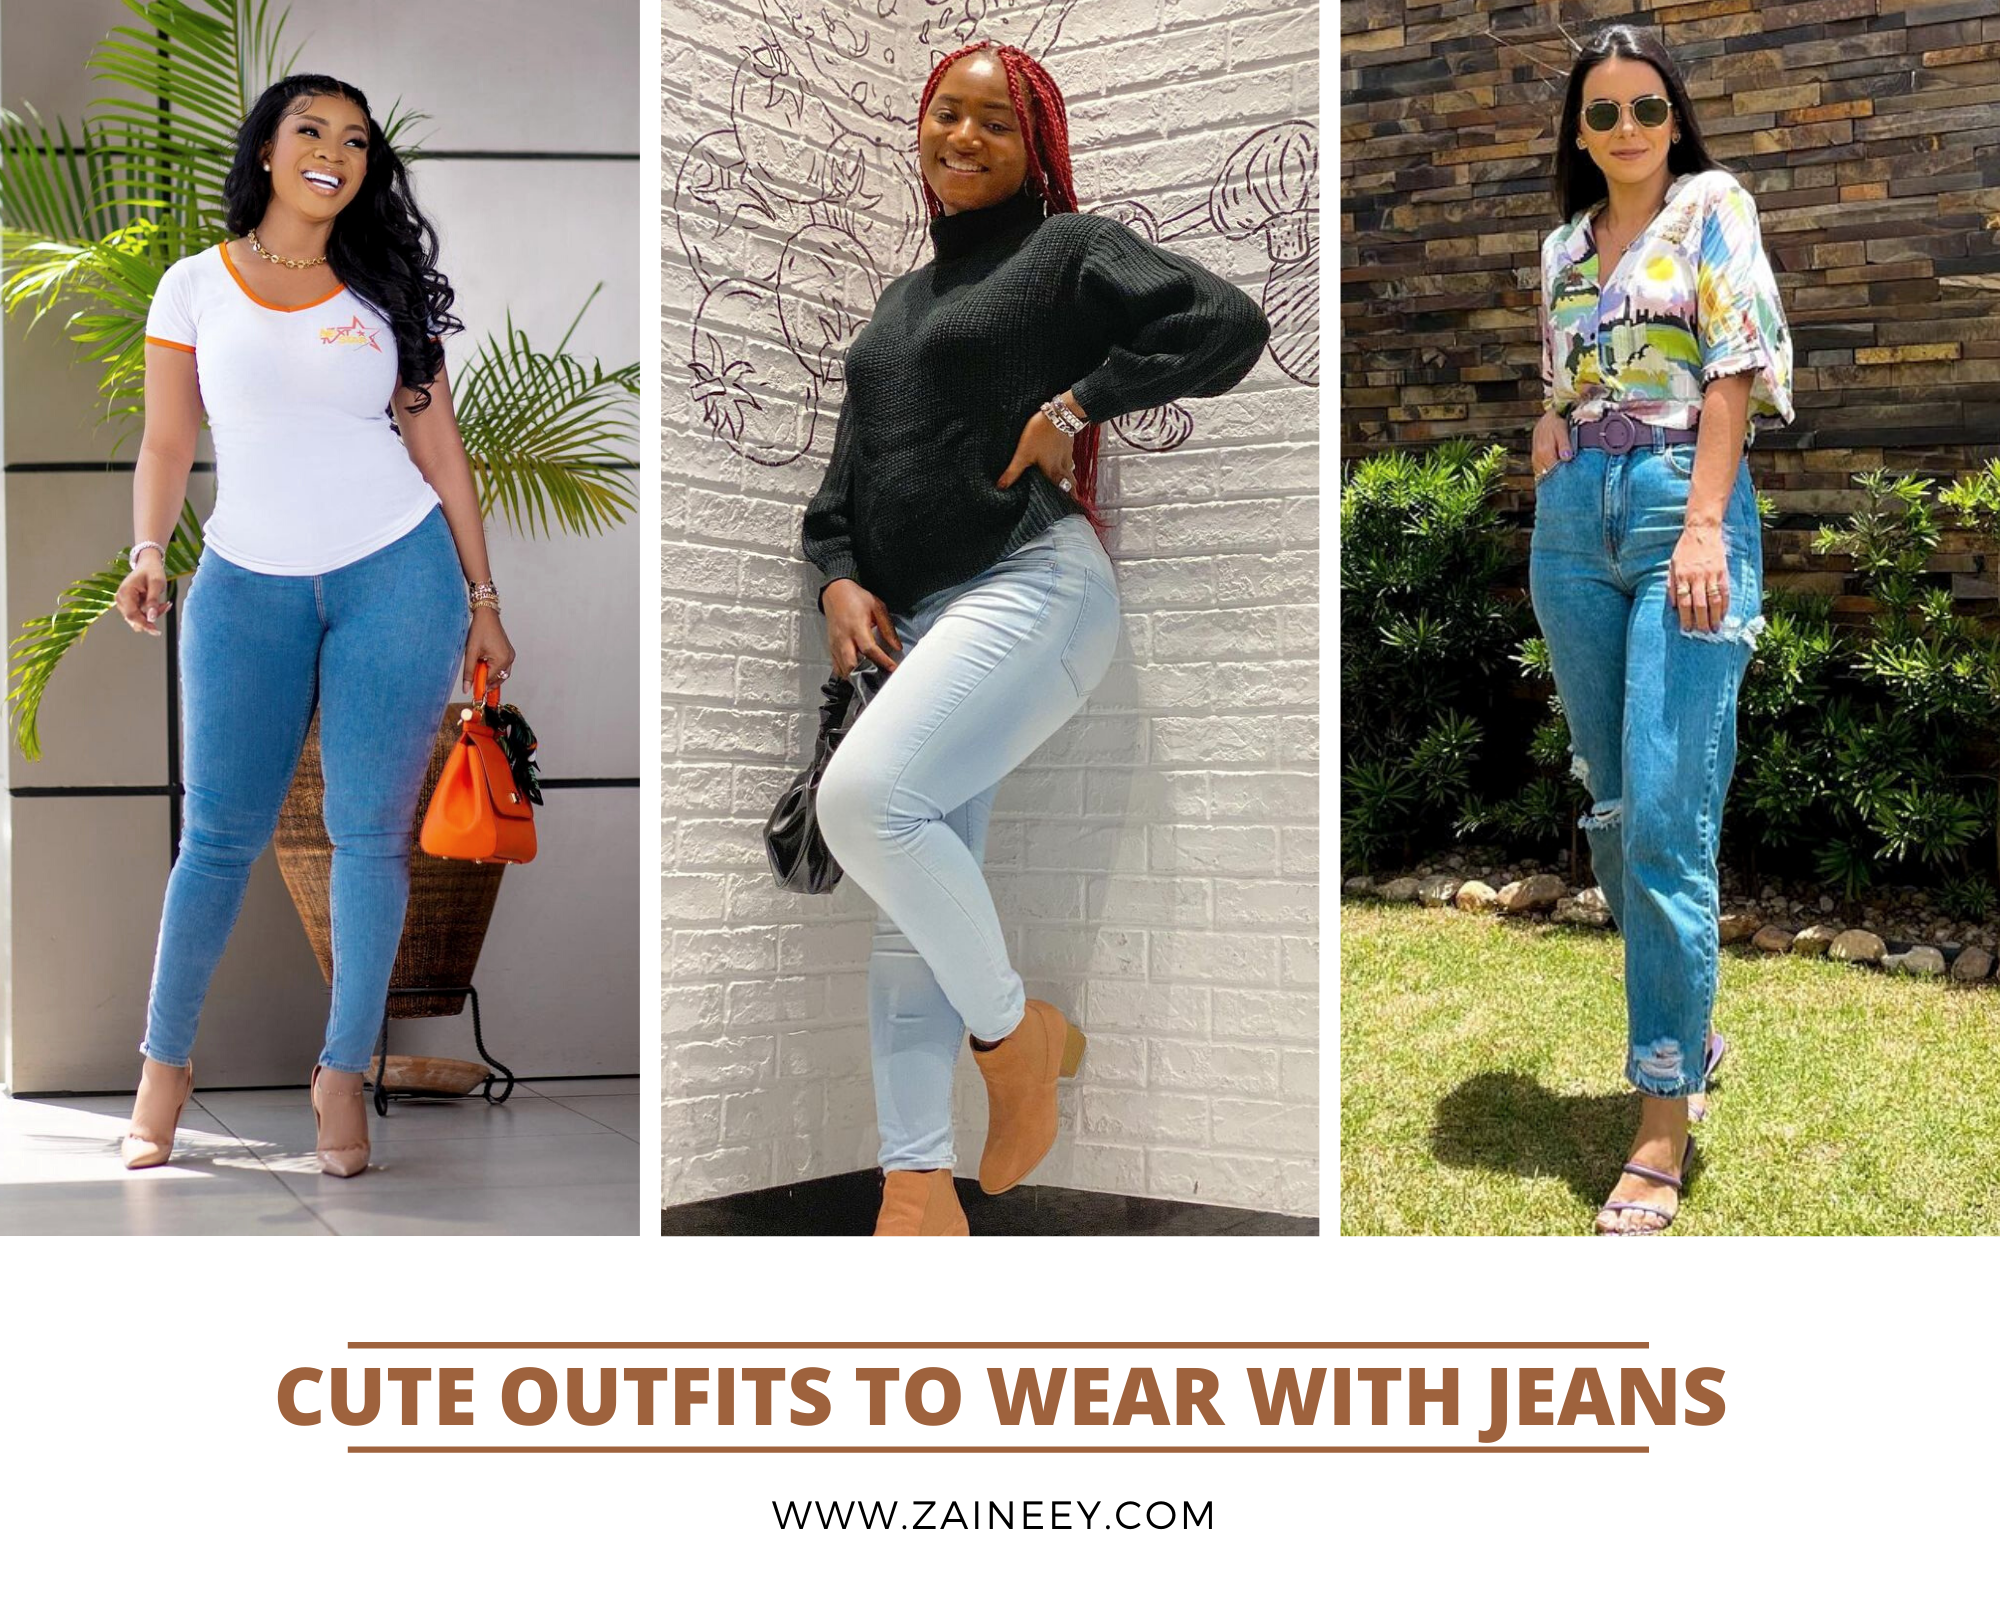 Outfits to Wear with Jeans